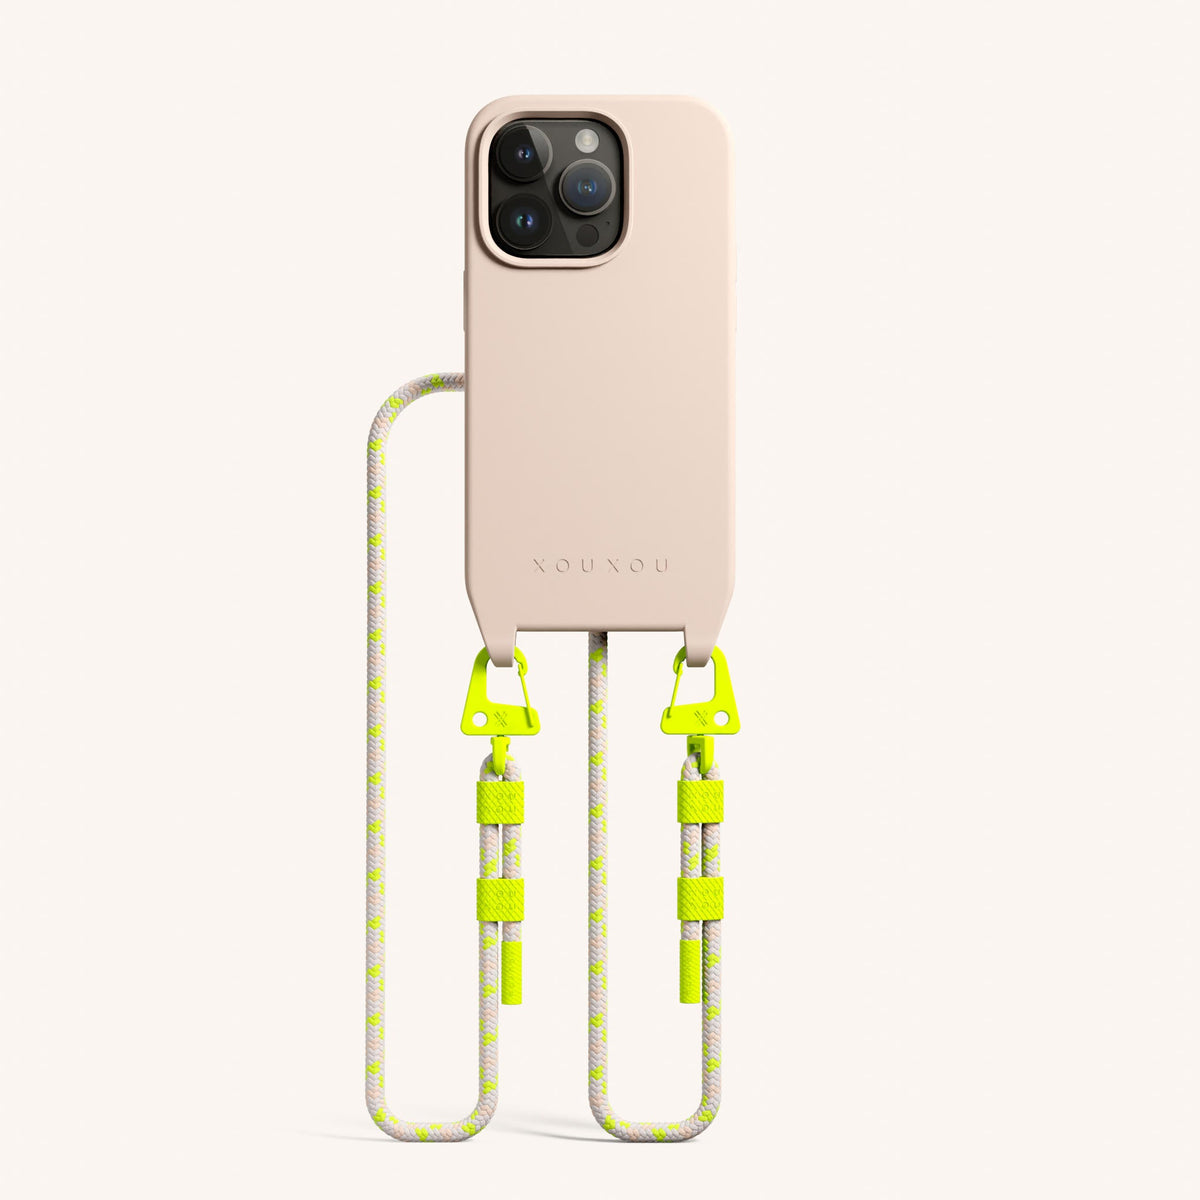 Phone Necklace with Carabiner Rope for iPhone 14 Pro without MagSafe in Powder Pink + Neon Camouflage Total View | XOUXOU #phone model_iphone 14 pro